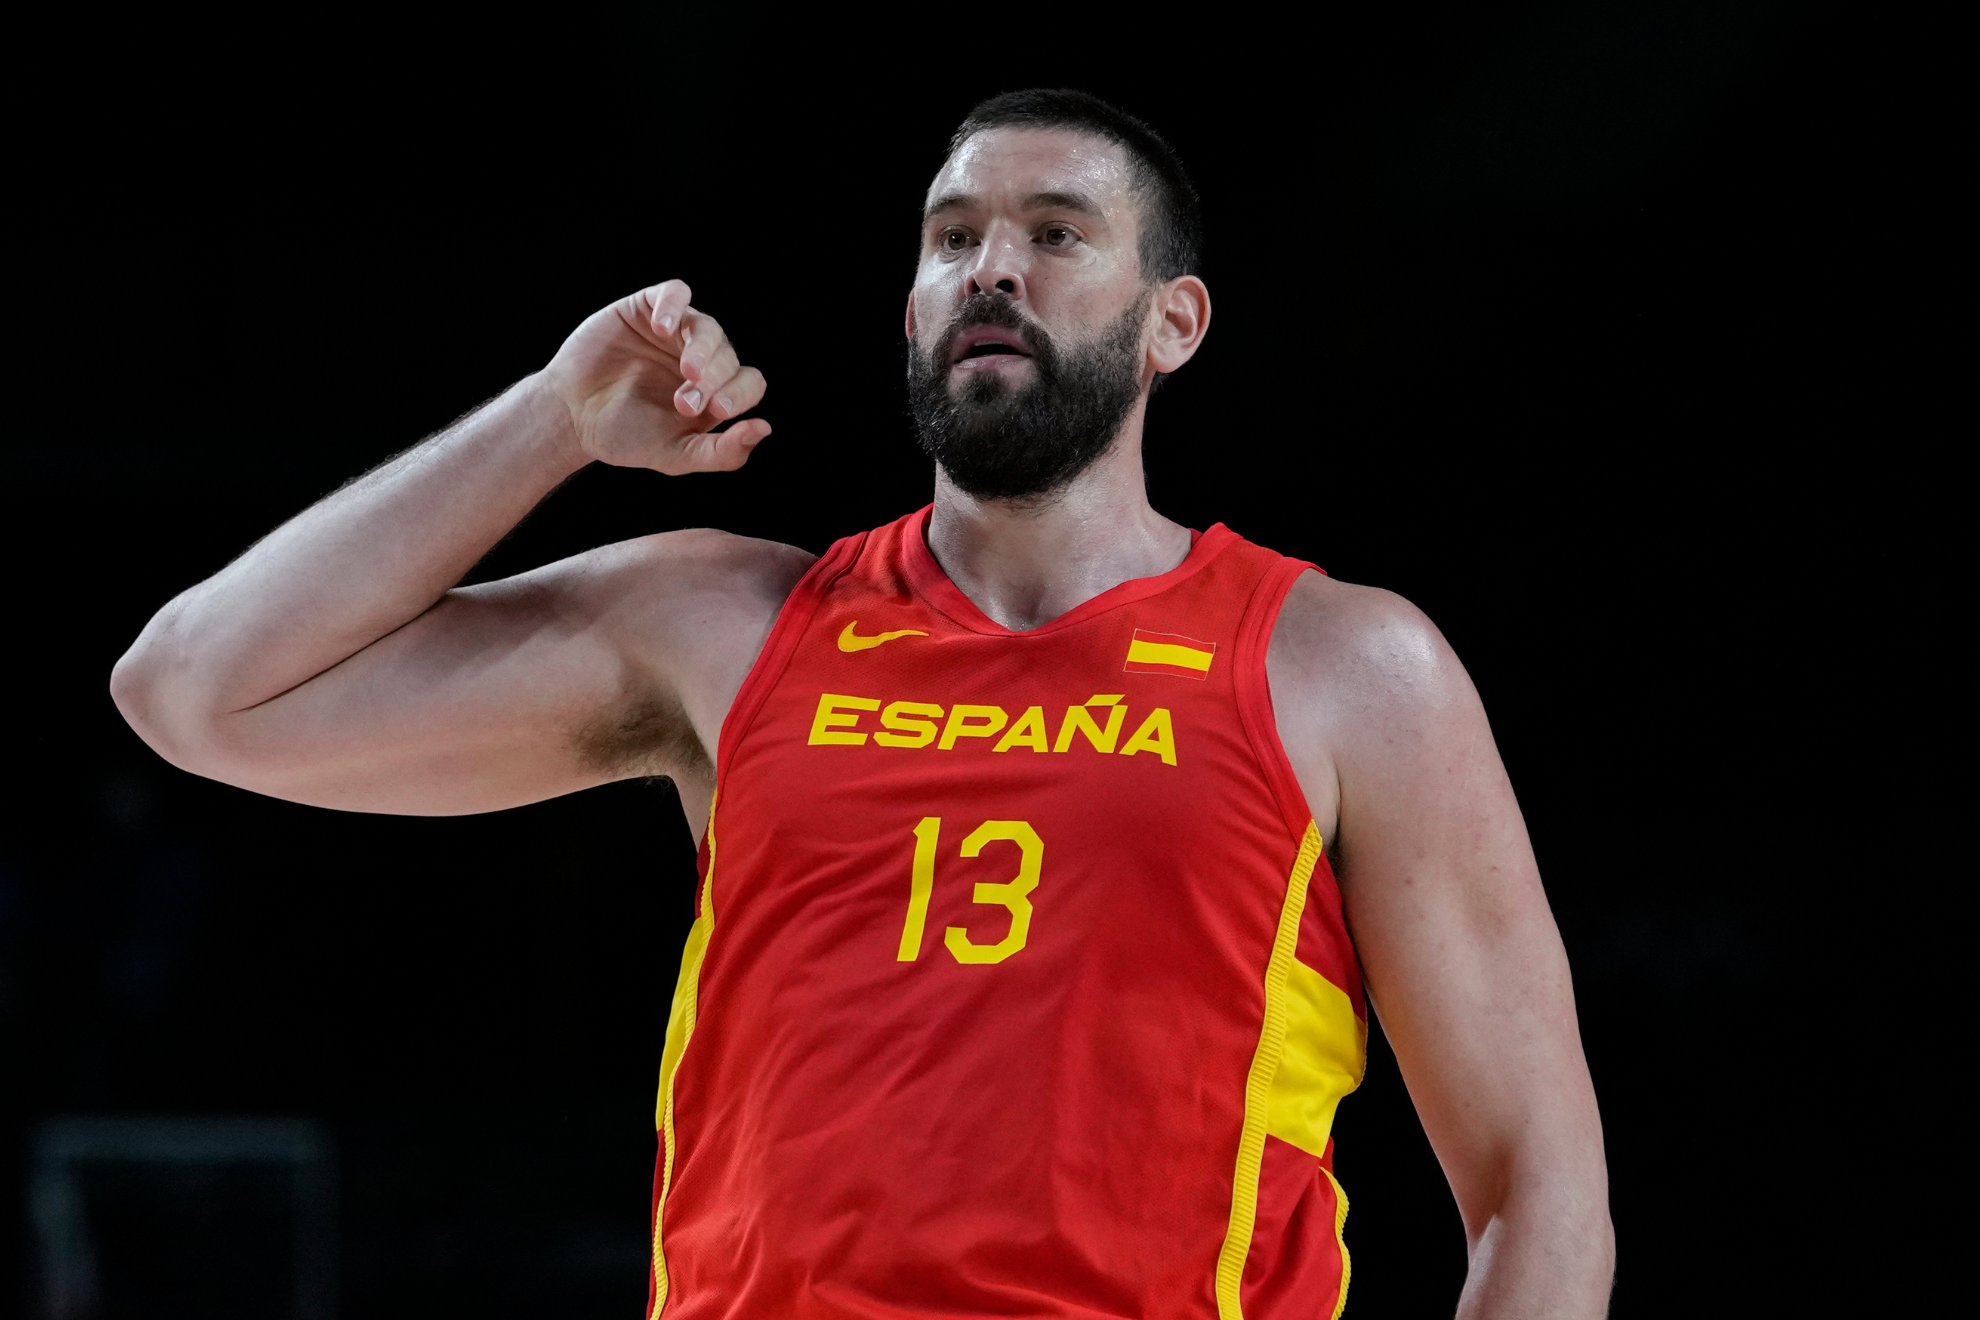 Marc Gasol is one of the best Spanish basketball players in history.